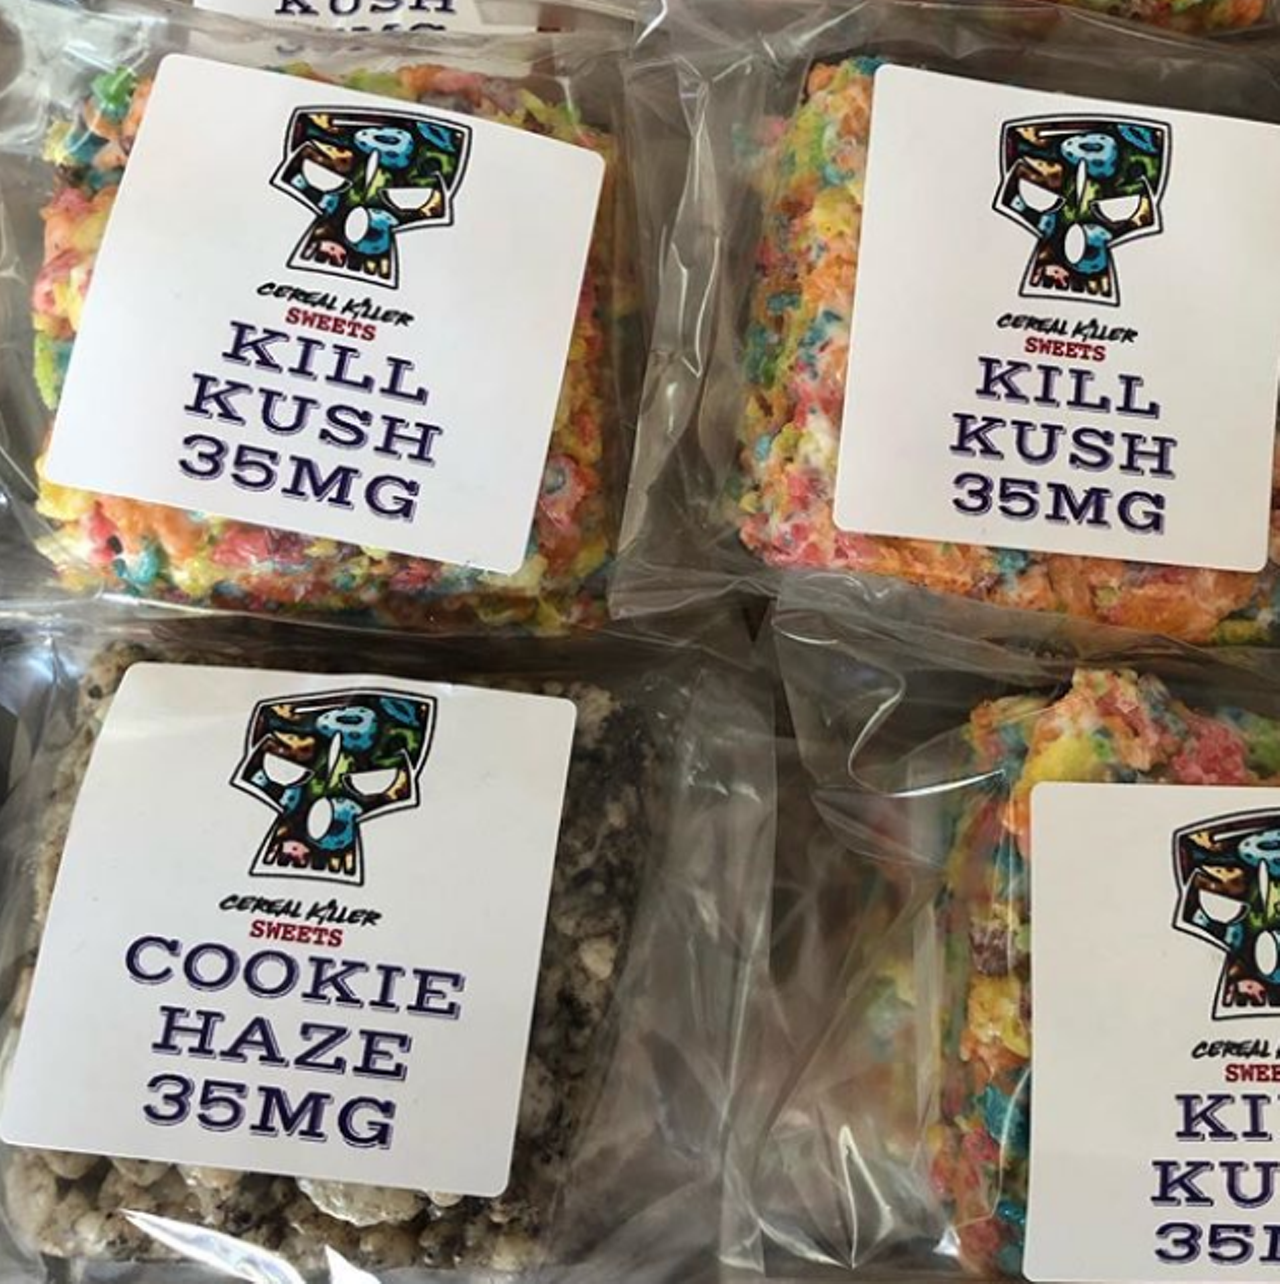 Think of these treats as the childhood sweets you know and love, but with an adult twist. While some treats are made sans CBD, certain flavors offer the benefits of the sought-after phytocannabinoid.
Photo via Instagram / cerealkillersweets